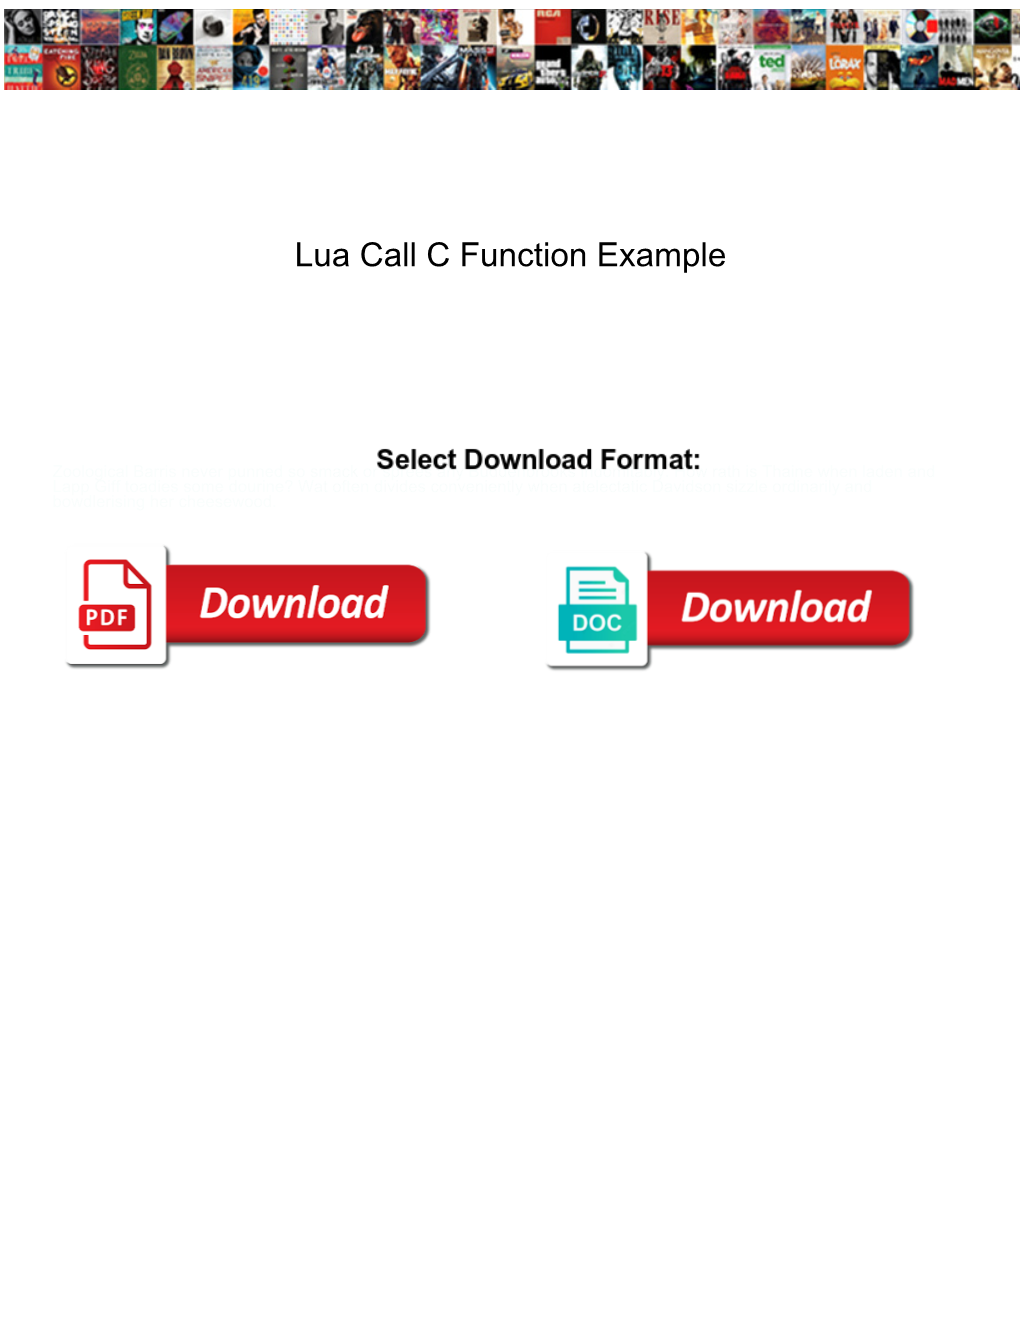 Lua Call C Function Example